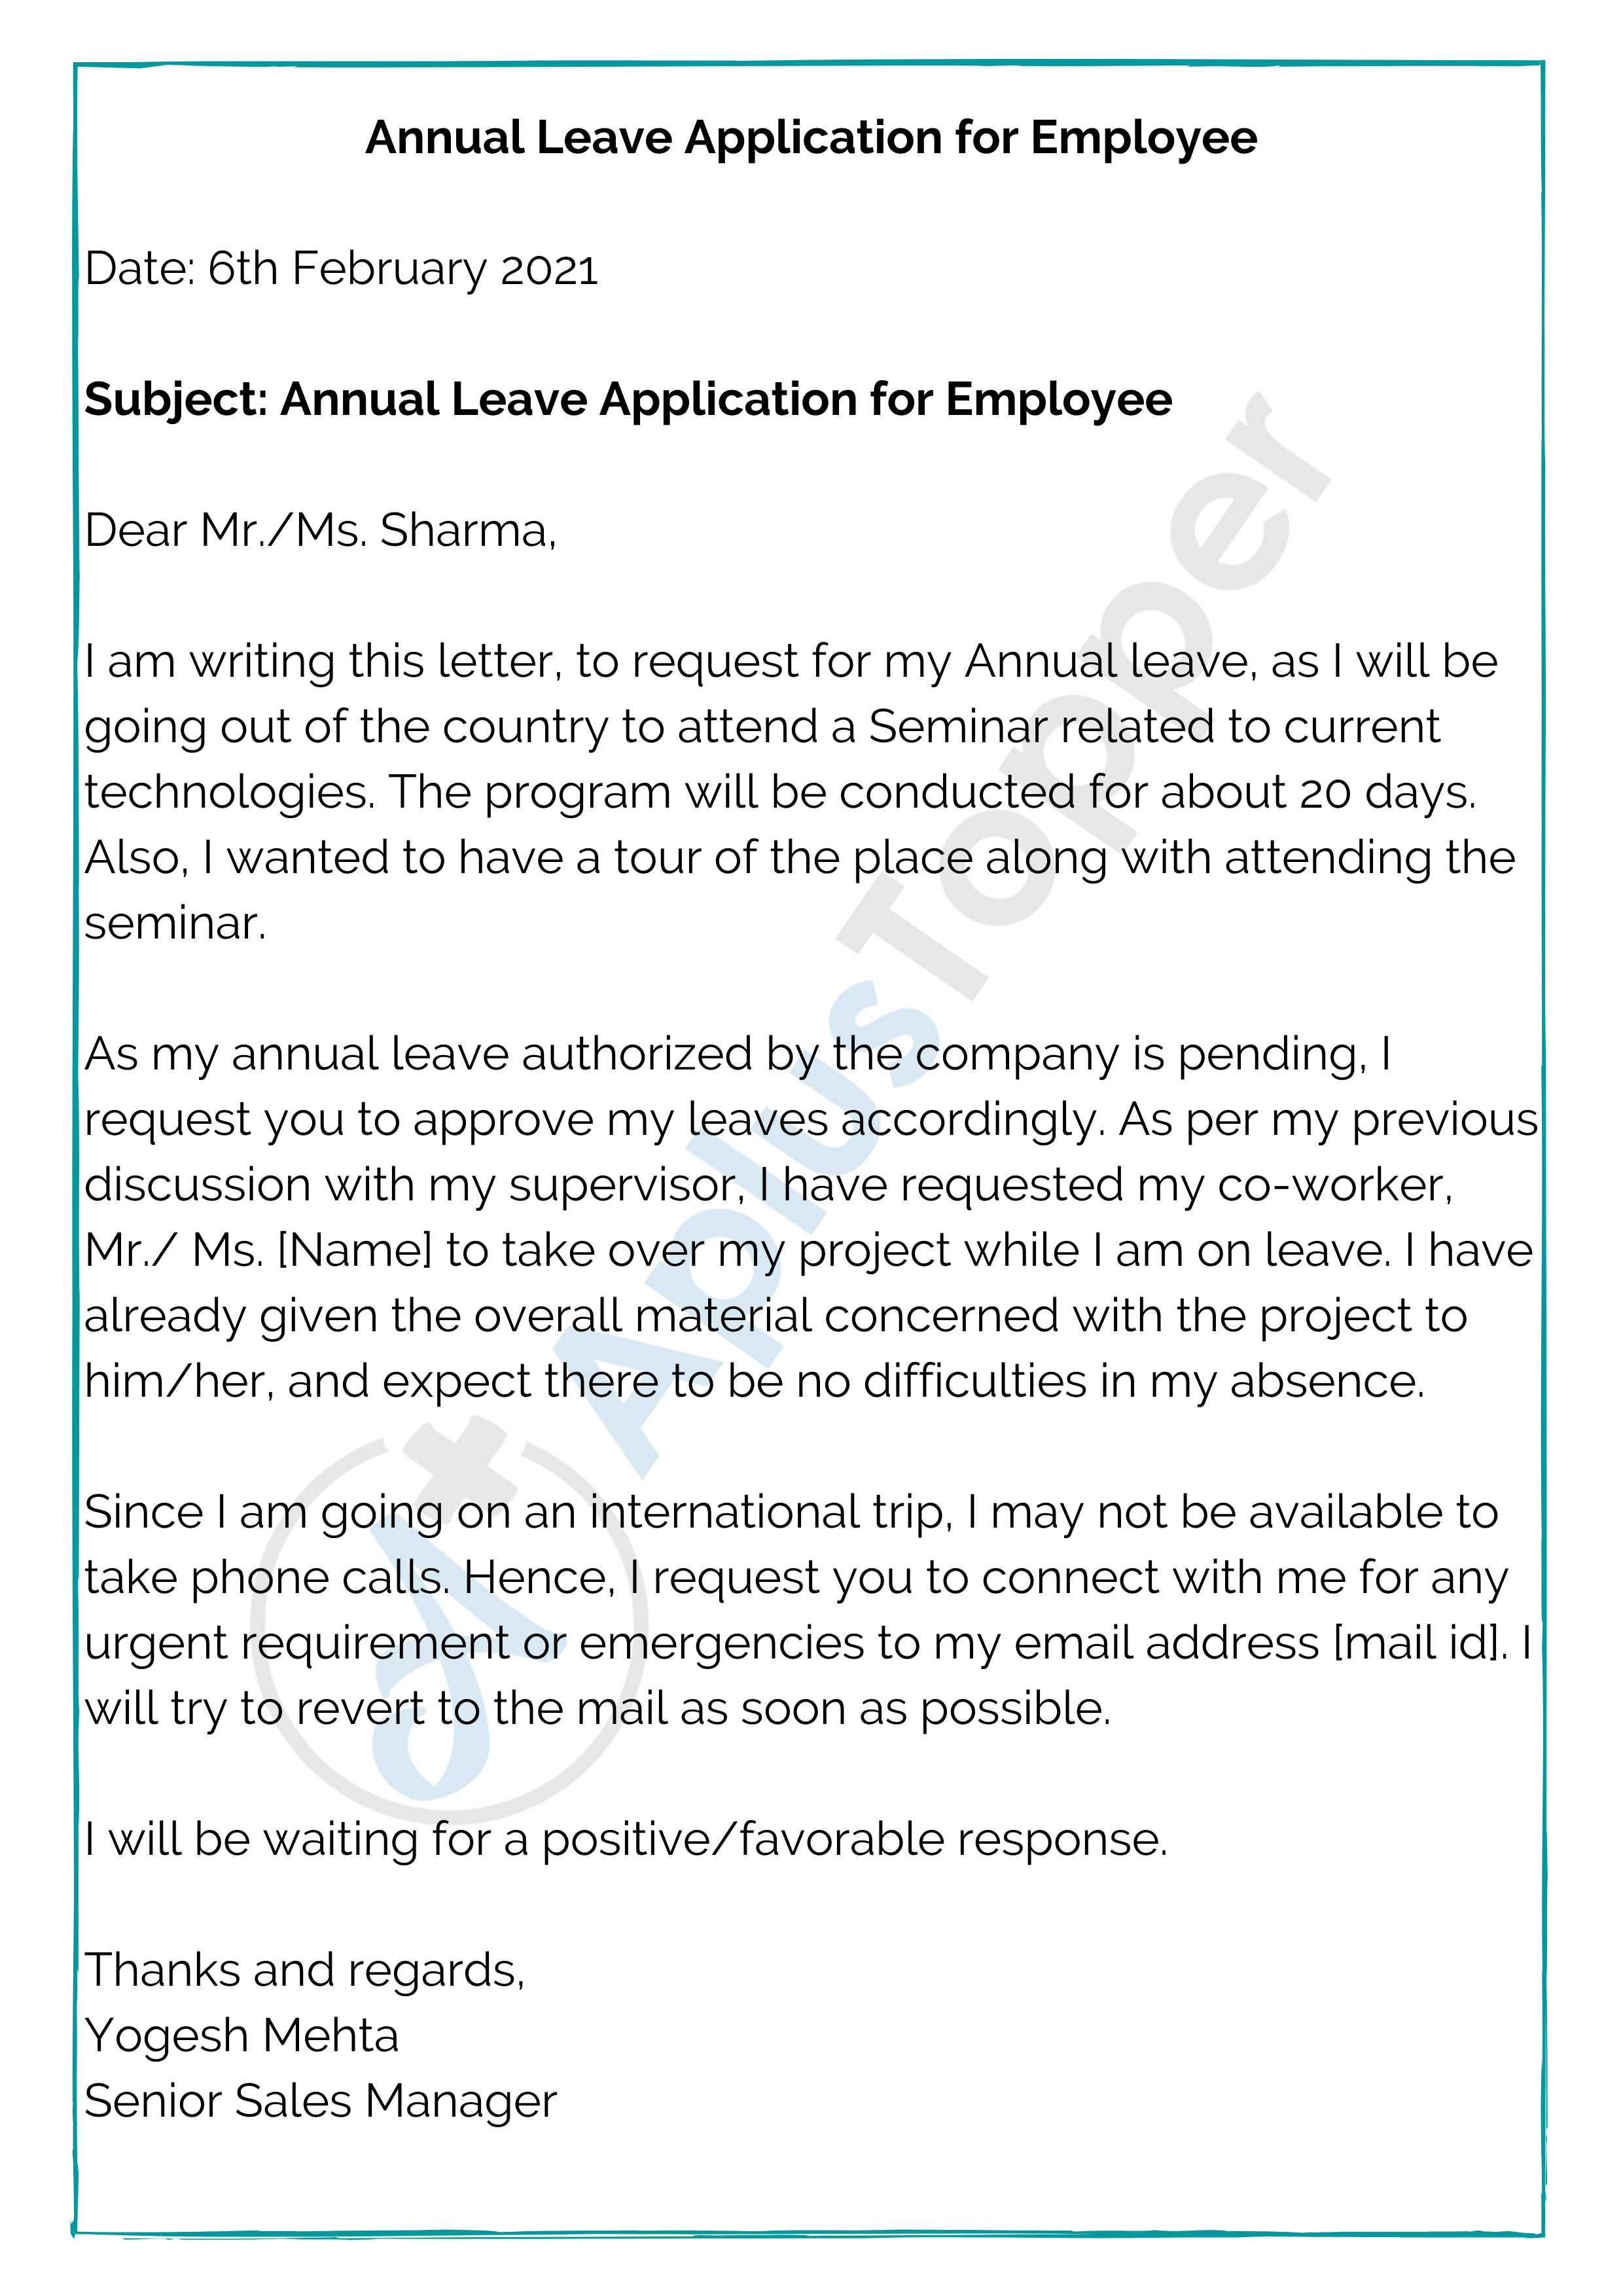 Annual Leave Application  Format, Samples  Annual Leave